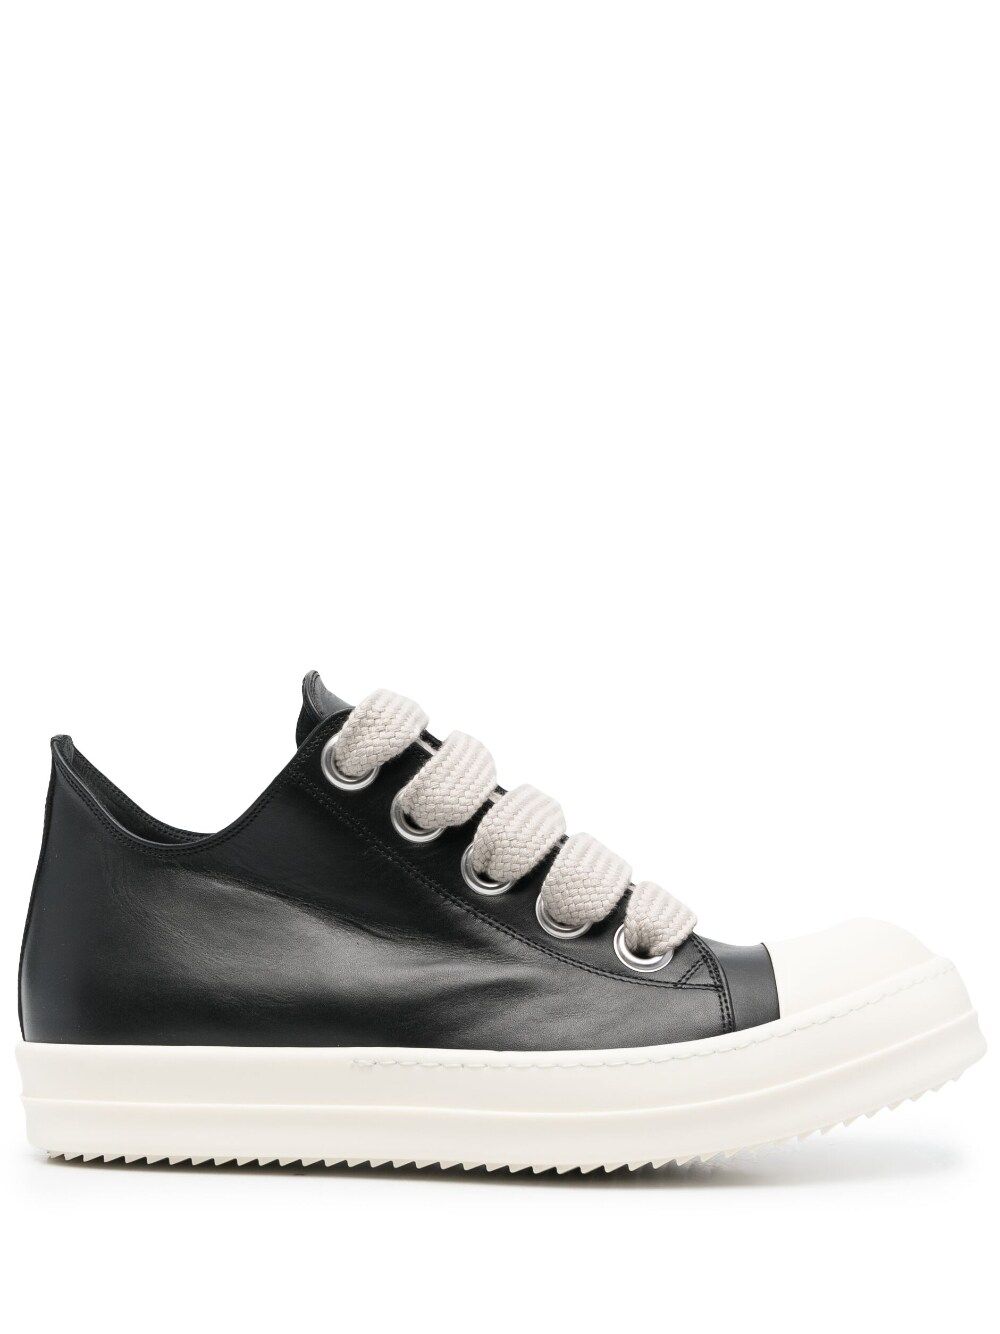 Rick Owens Low-top Leather Sneakers In Black | ModeSens